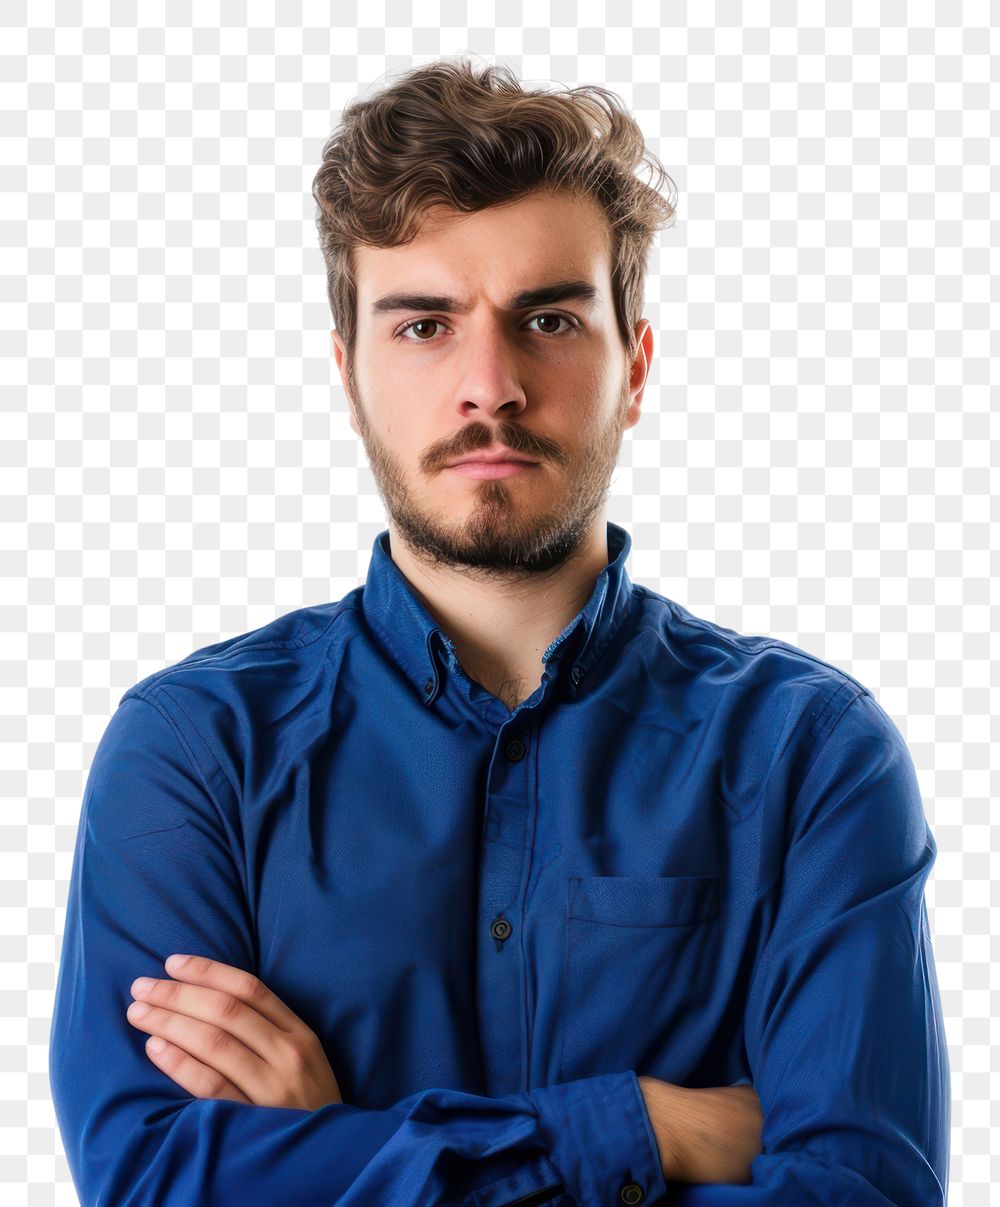 Worried man with blue shirt portrait adult photo.